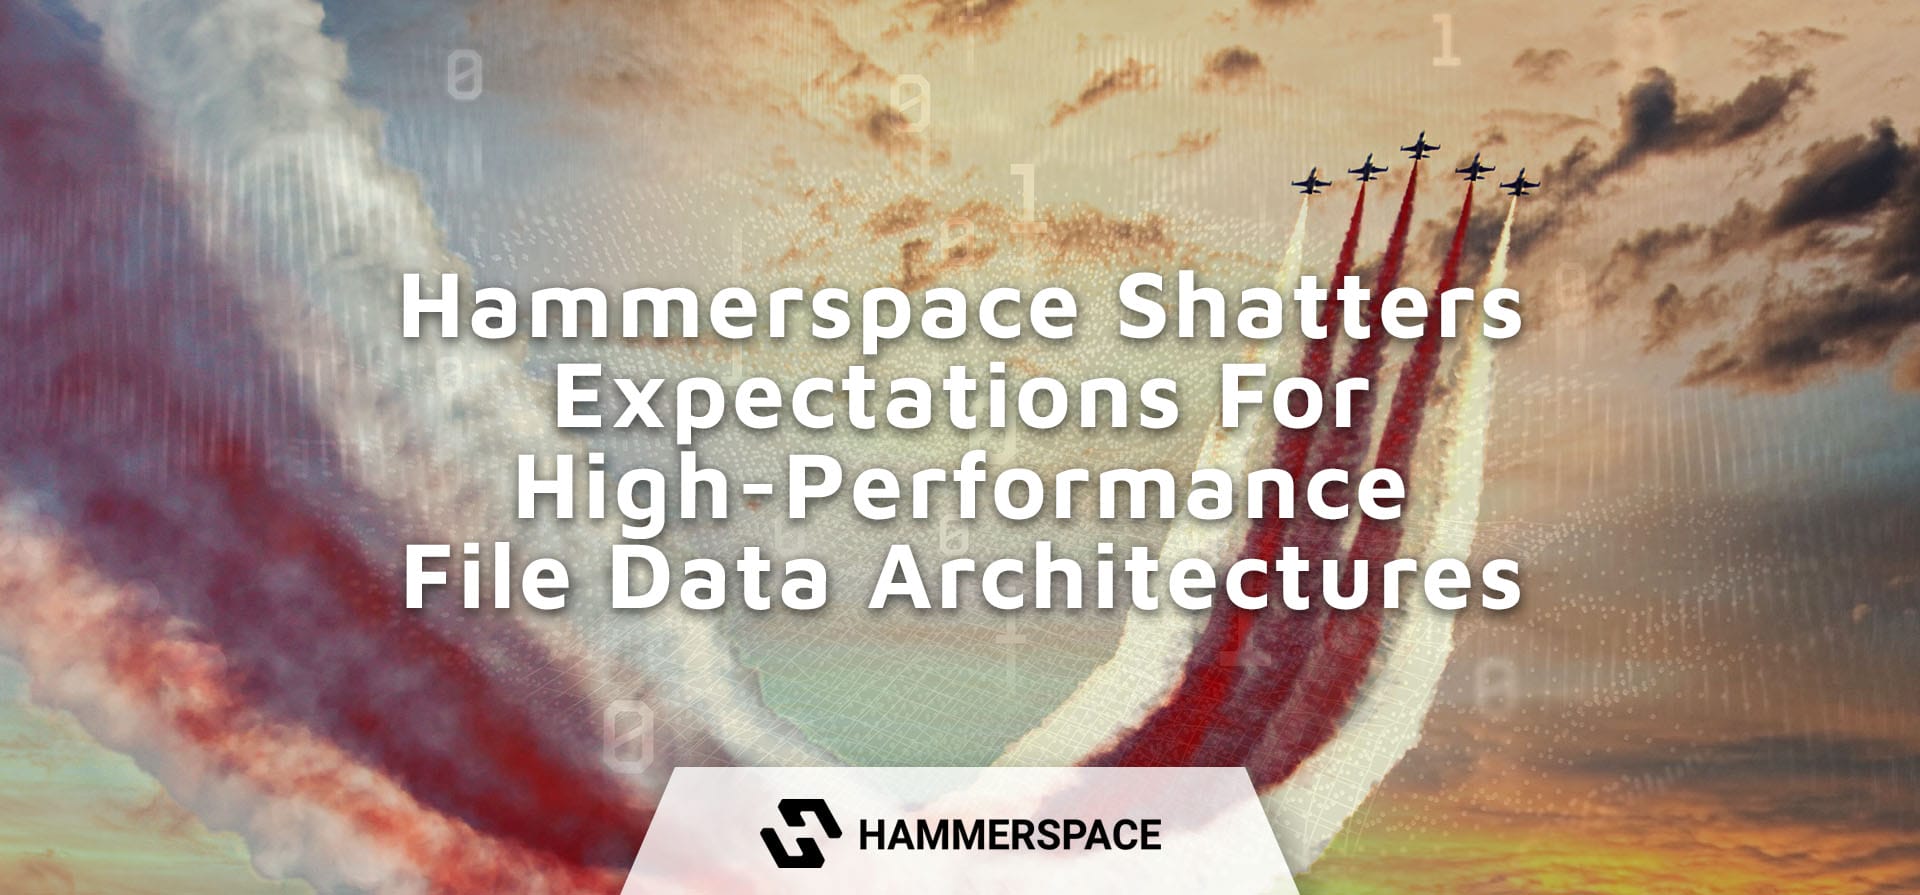 Hammerspace Shatters Expectations for High-Performance File Data Architectures